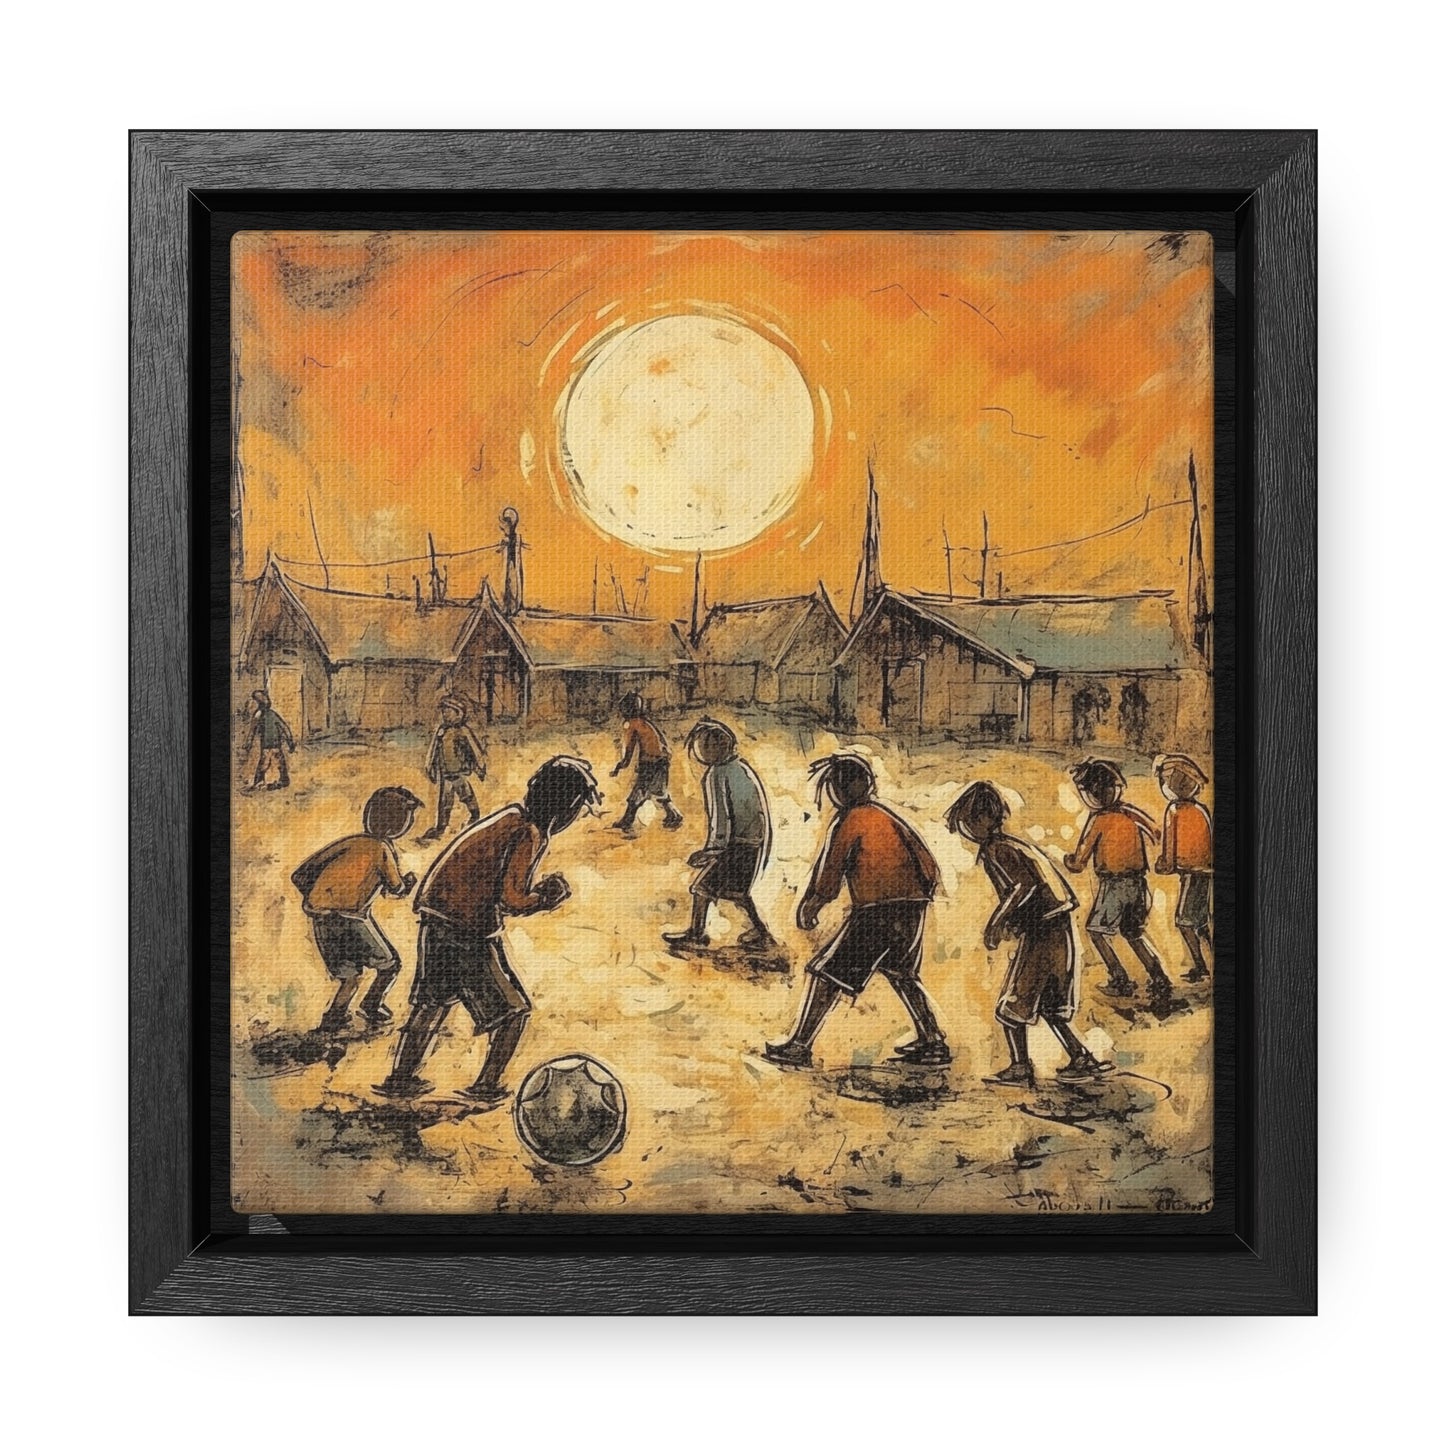 Childhood 27, Gallery Canvas Wraps, Square Frame